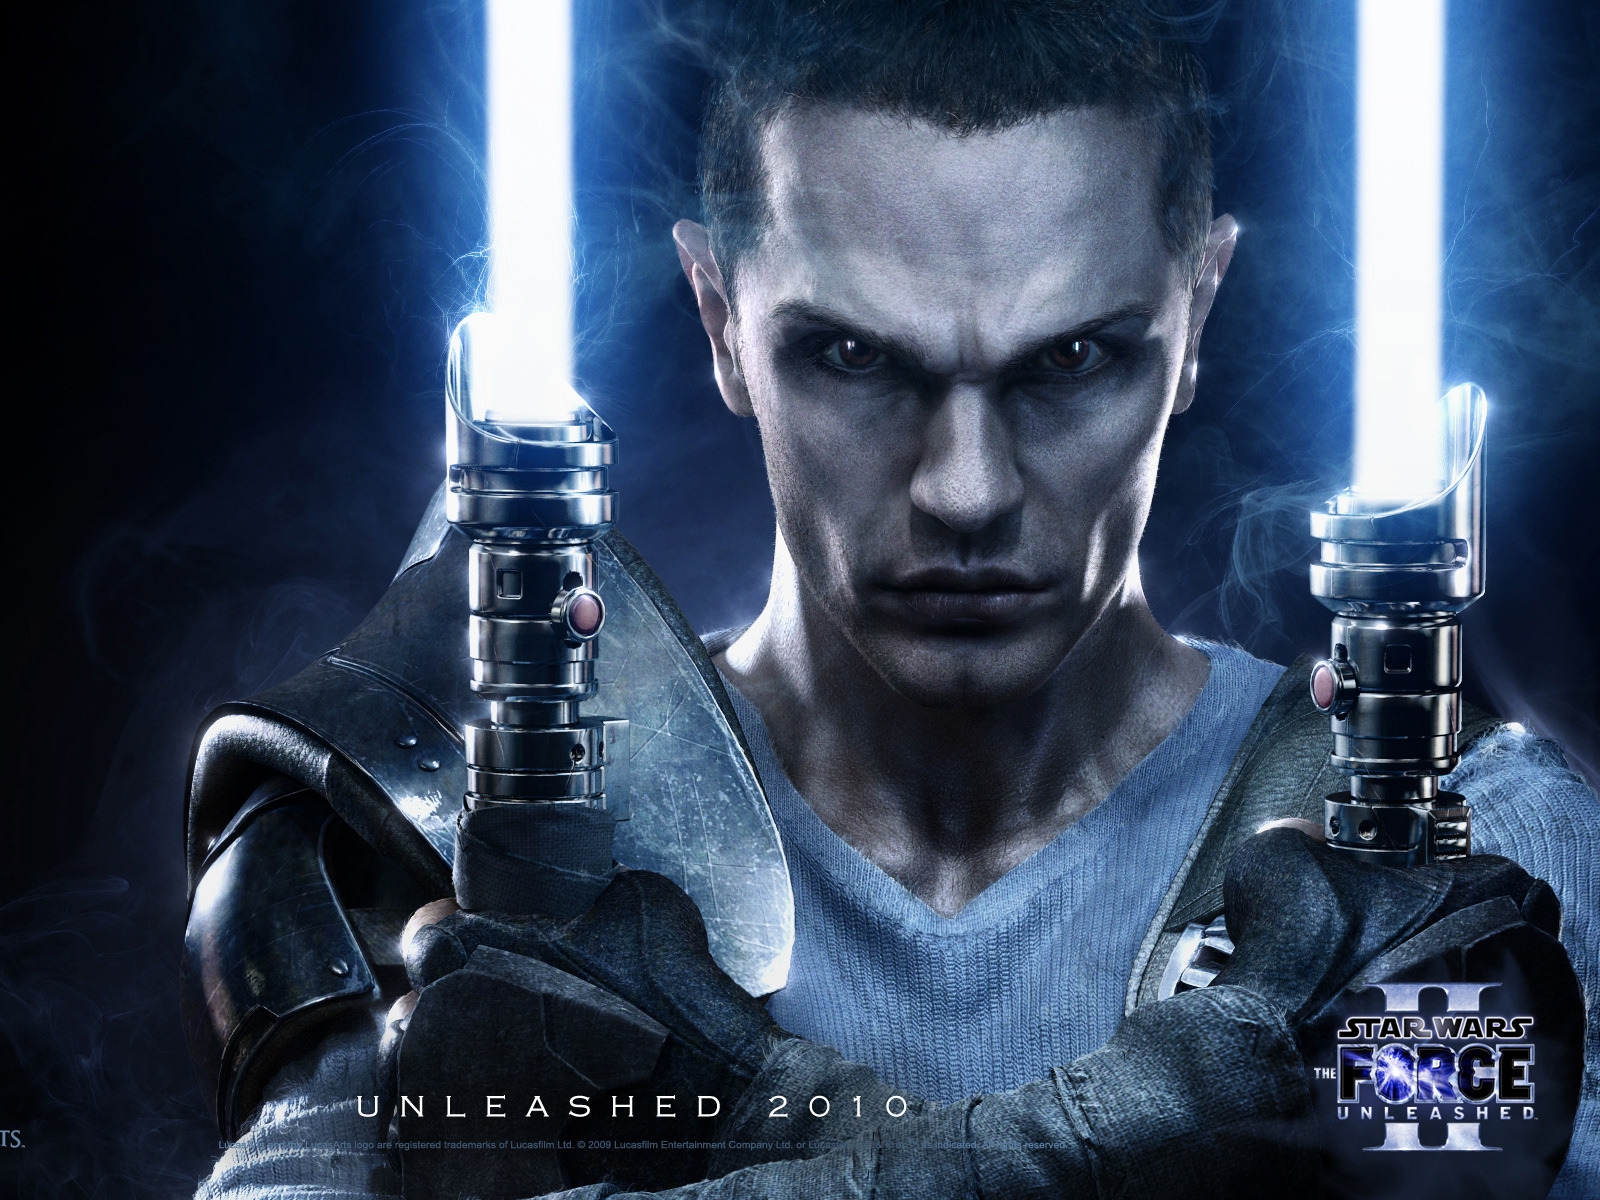 The Force Unleashed 2 for 1600 x 1200 resolution